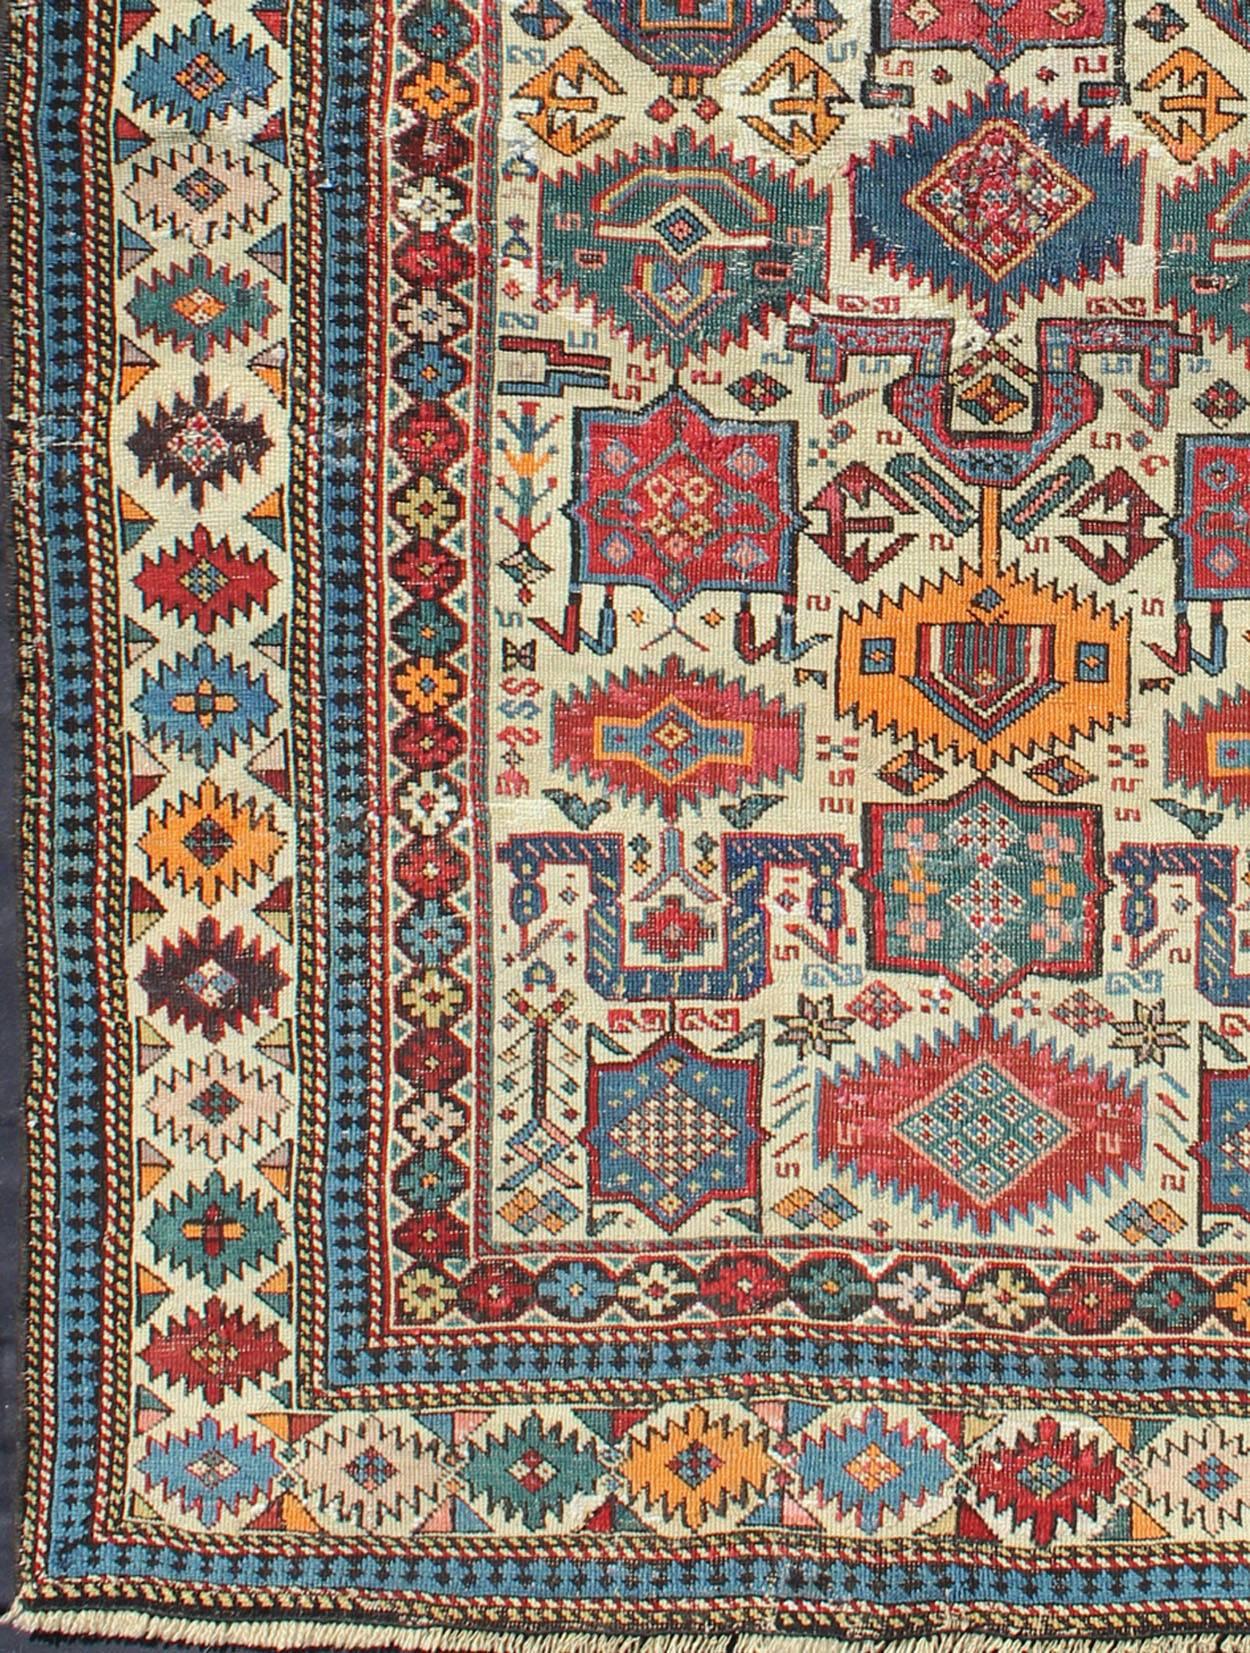 Antique Caucasian rugs from the Shirvan district village of Akstafa are among the rarest types of rugs from that region. Features the classic stylized birds and motifs on a ivory background. Akstafa rugs are more frequently found in either “long